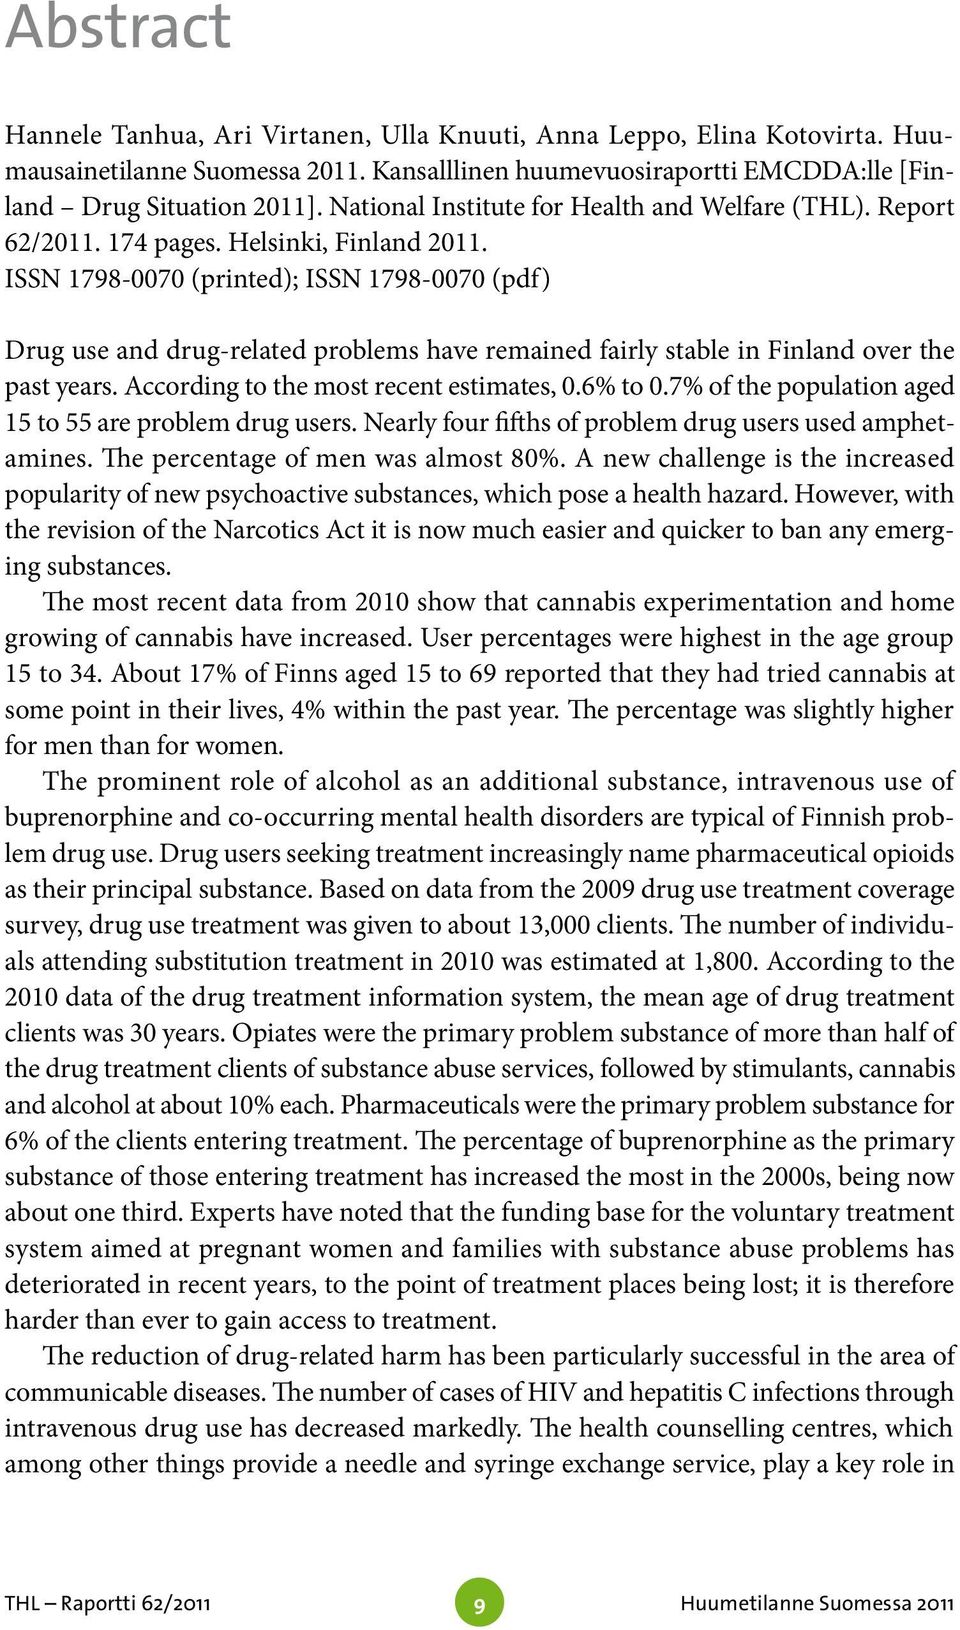 ISSN 1798-0070 (printed); ISSN 1798-0070 (pdf) Drug use and drug-related problems have remained fairly stable in Finland over the past years. According to the most recent estimates, 0.6% to 0.